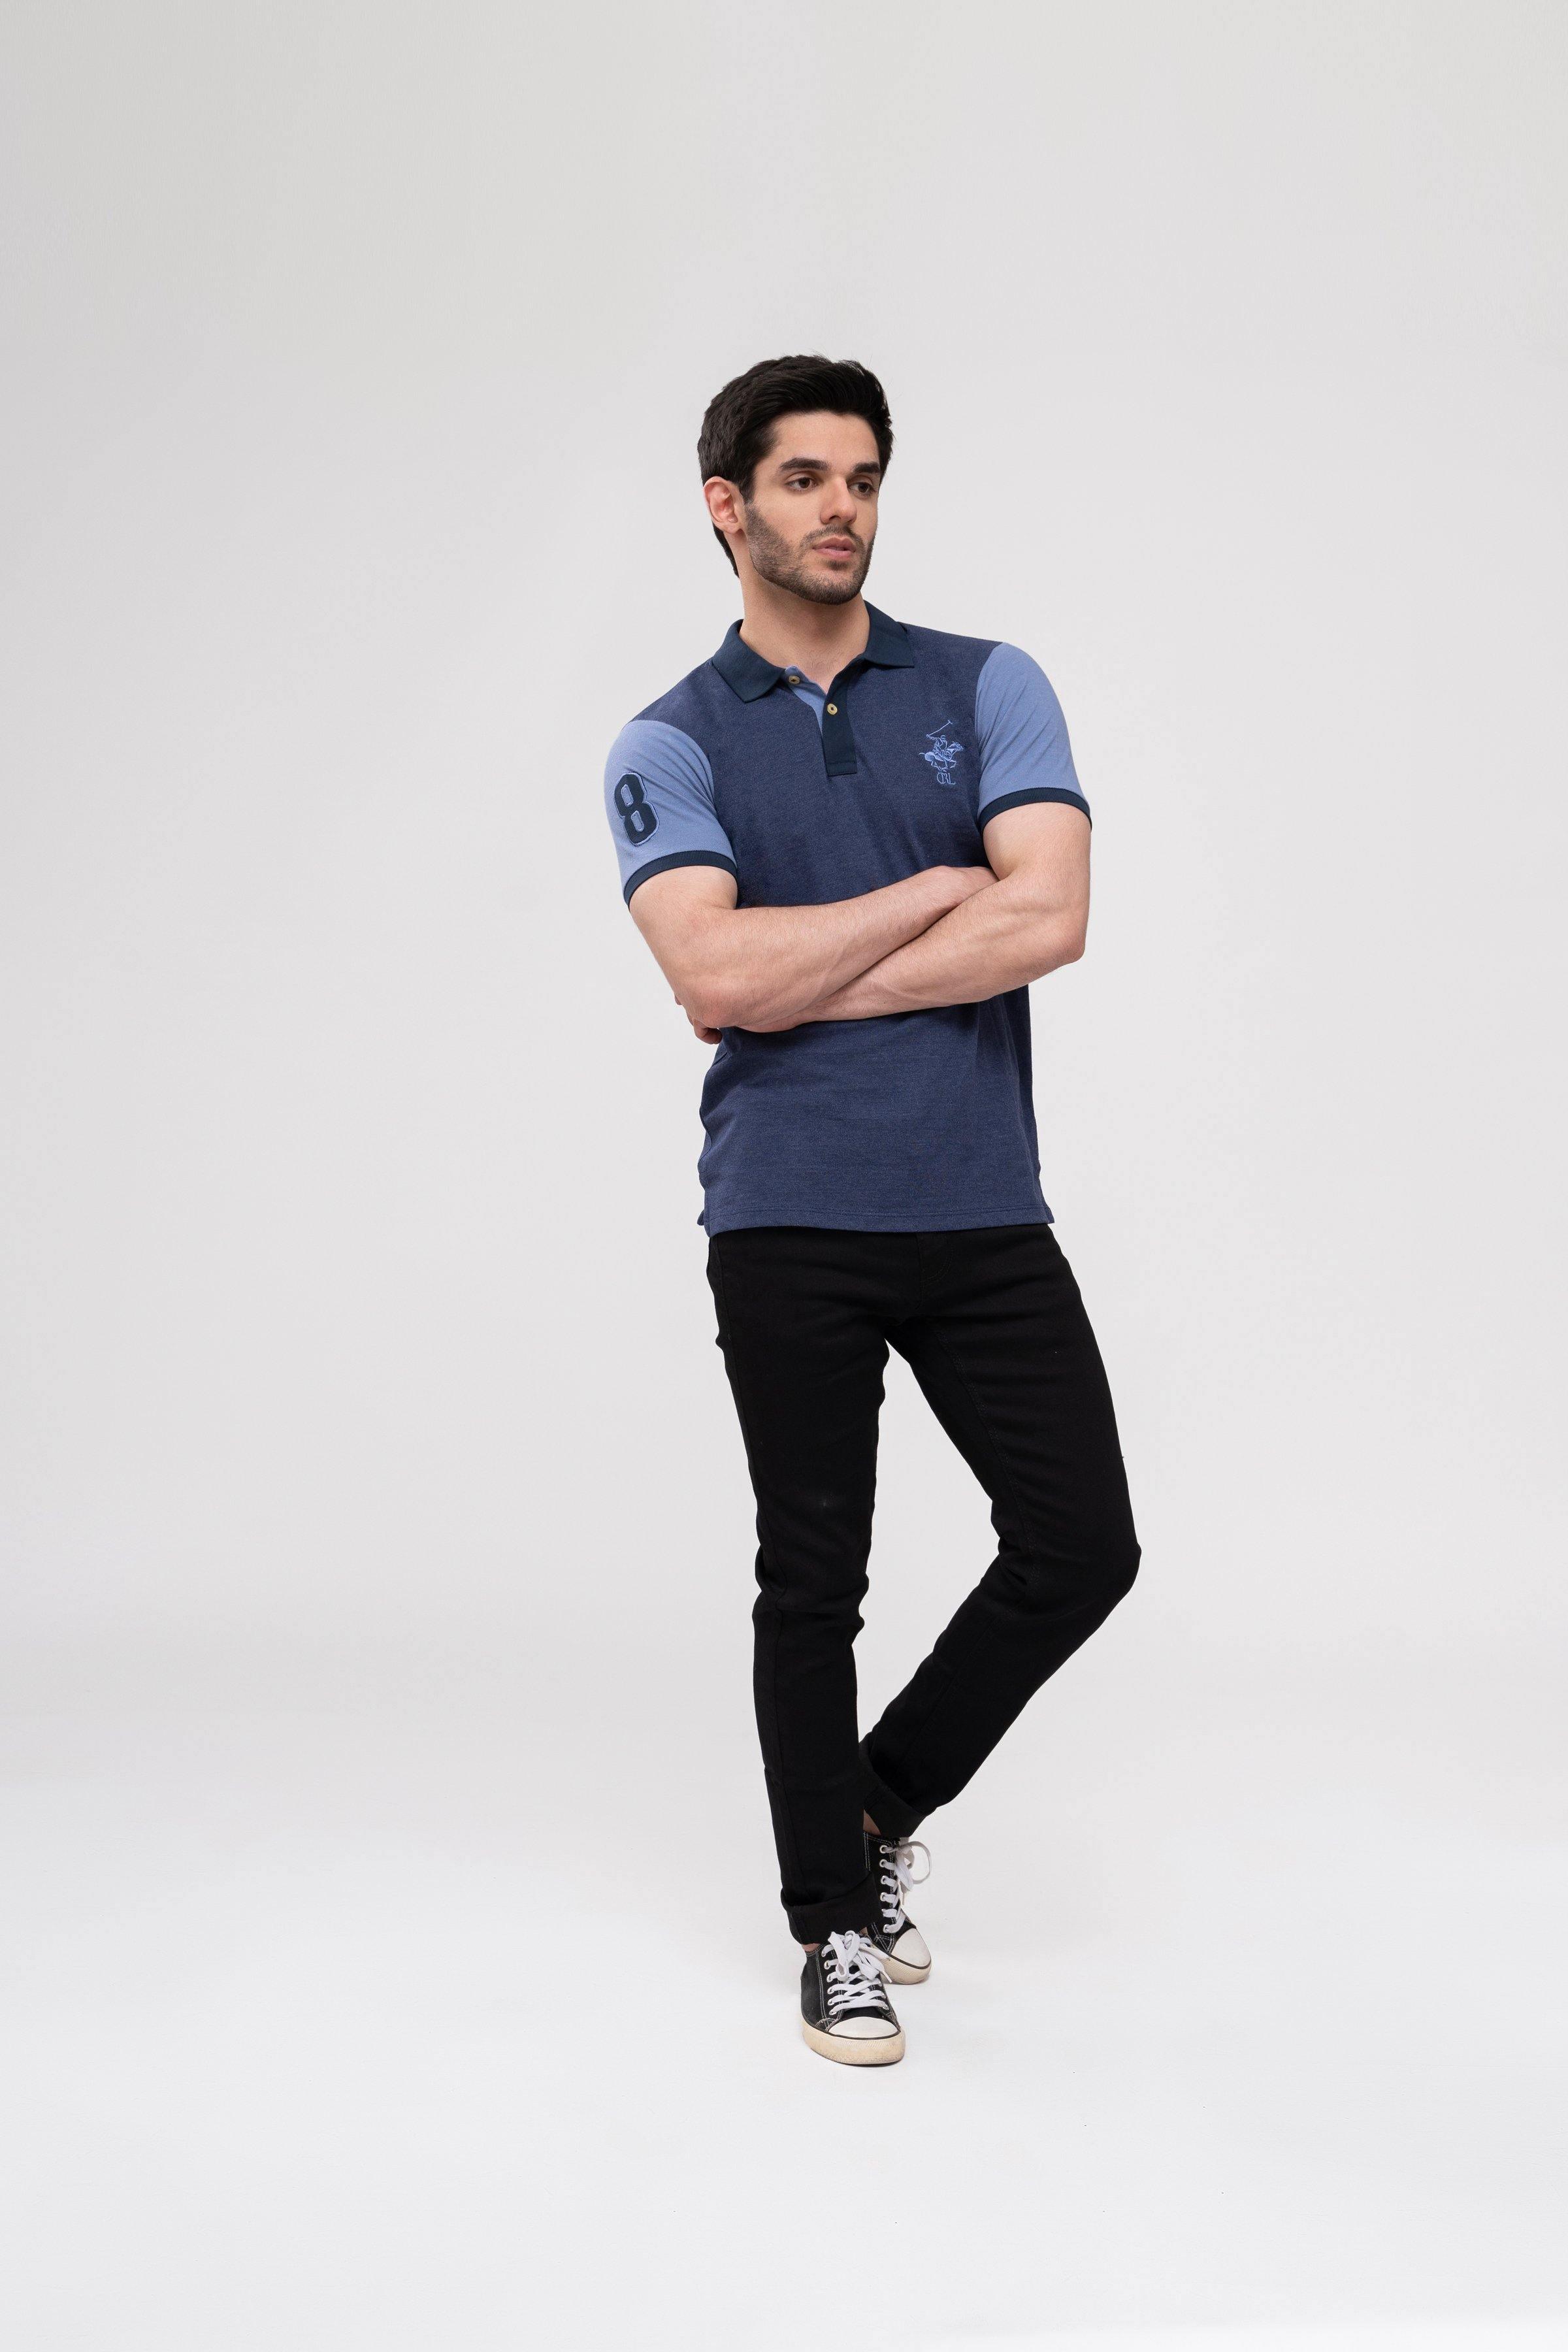 POLO SHIRT CONTRAST COLLAR BLUE at Charcoal Clothing